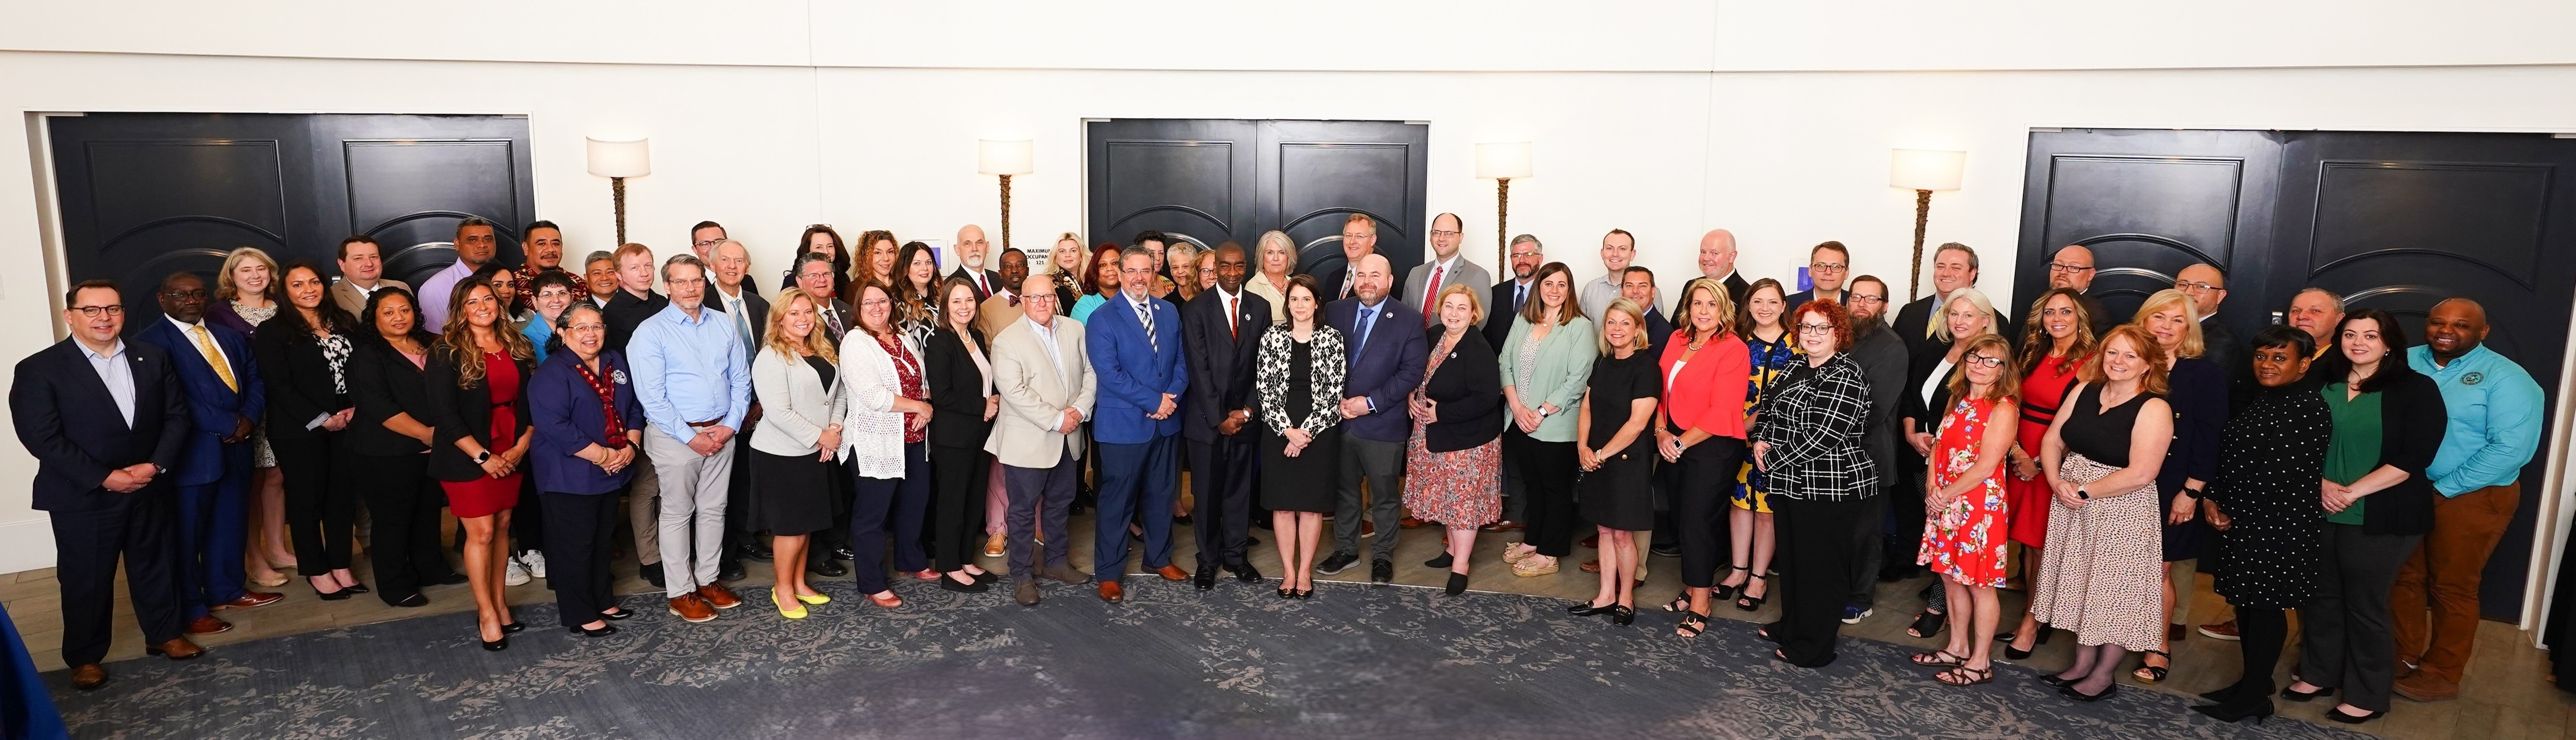 Group photo of members during the 2024 Standards Board Annual Meeting, held in Kansas City, MO on April 17, 2024 - April 18, 2024.